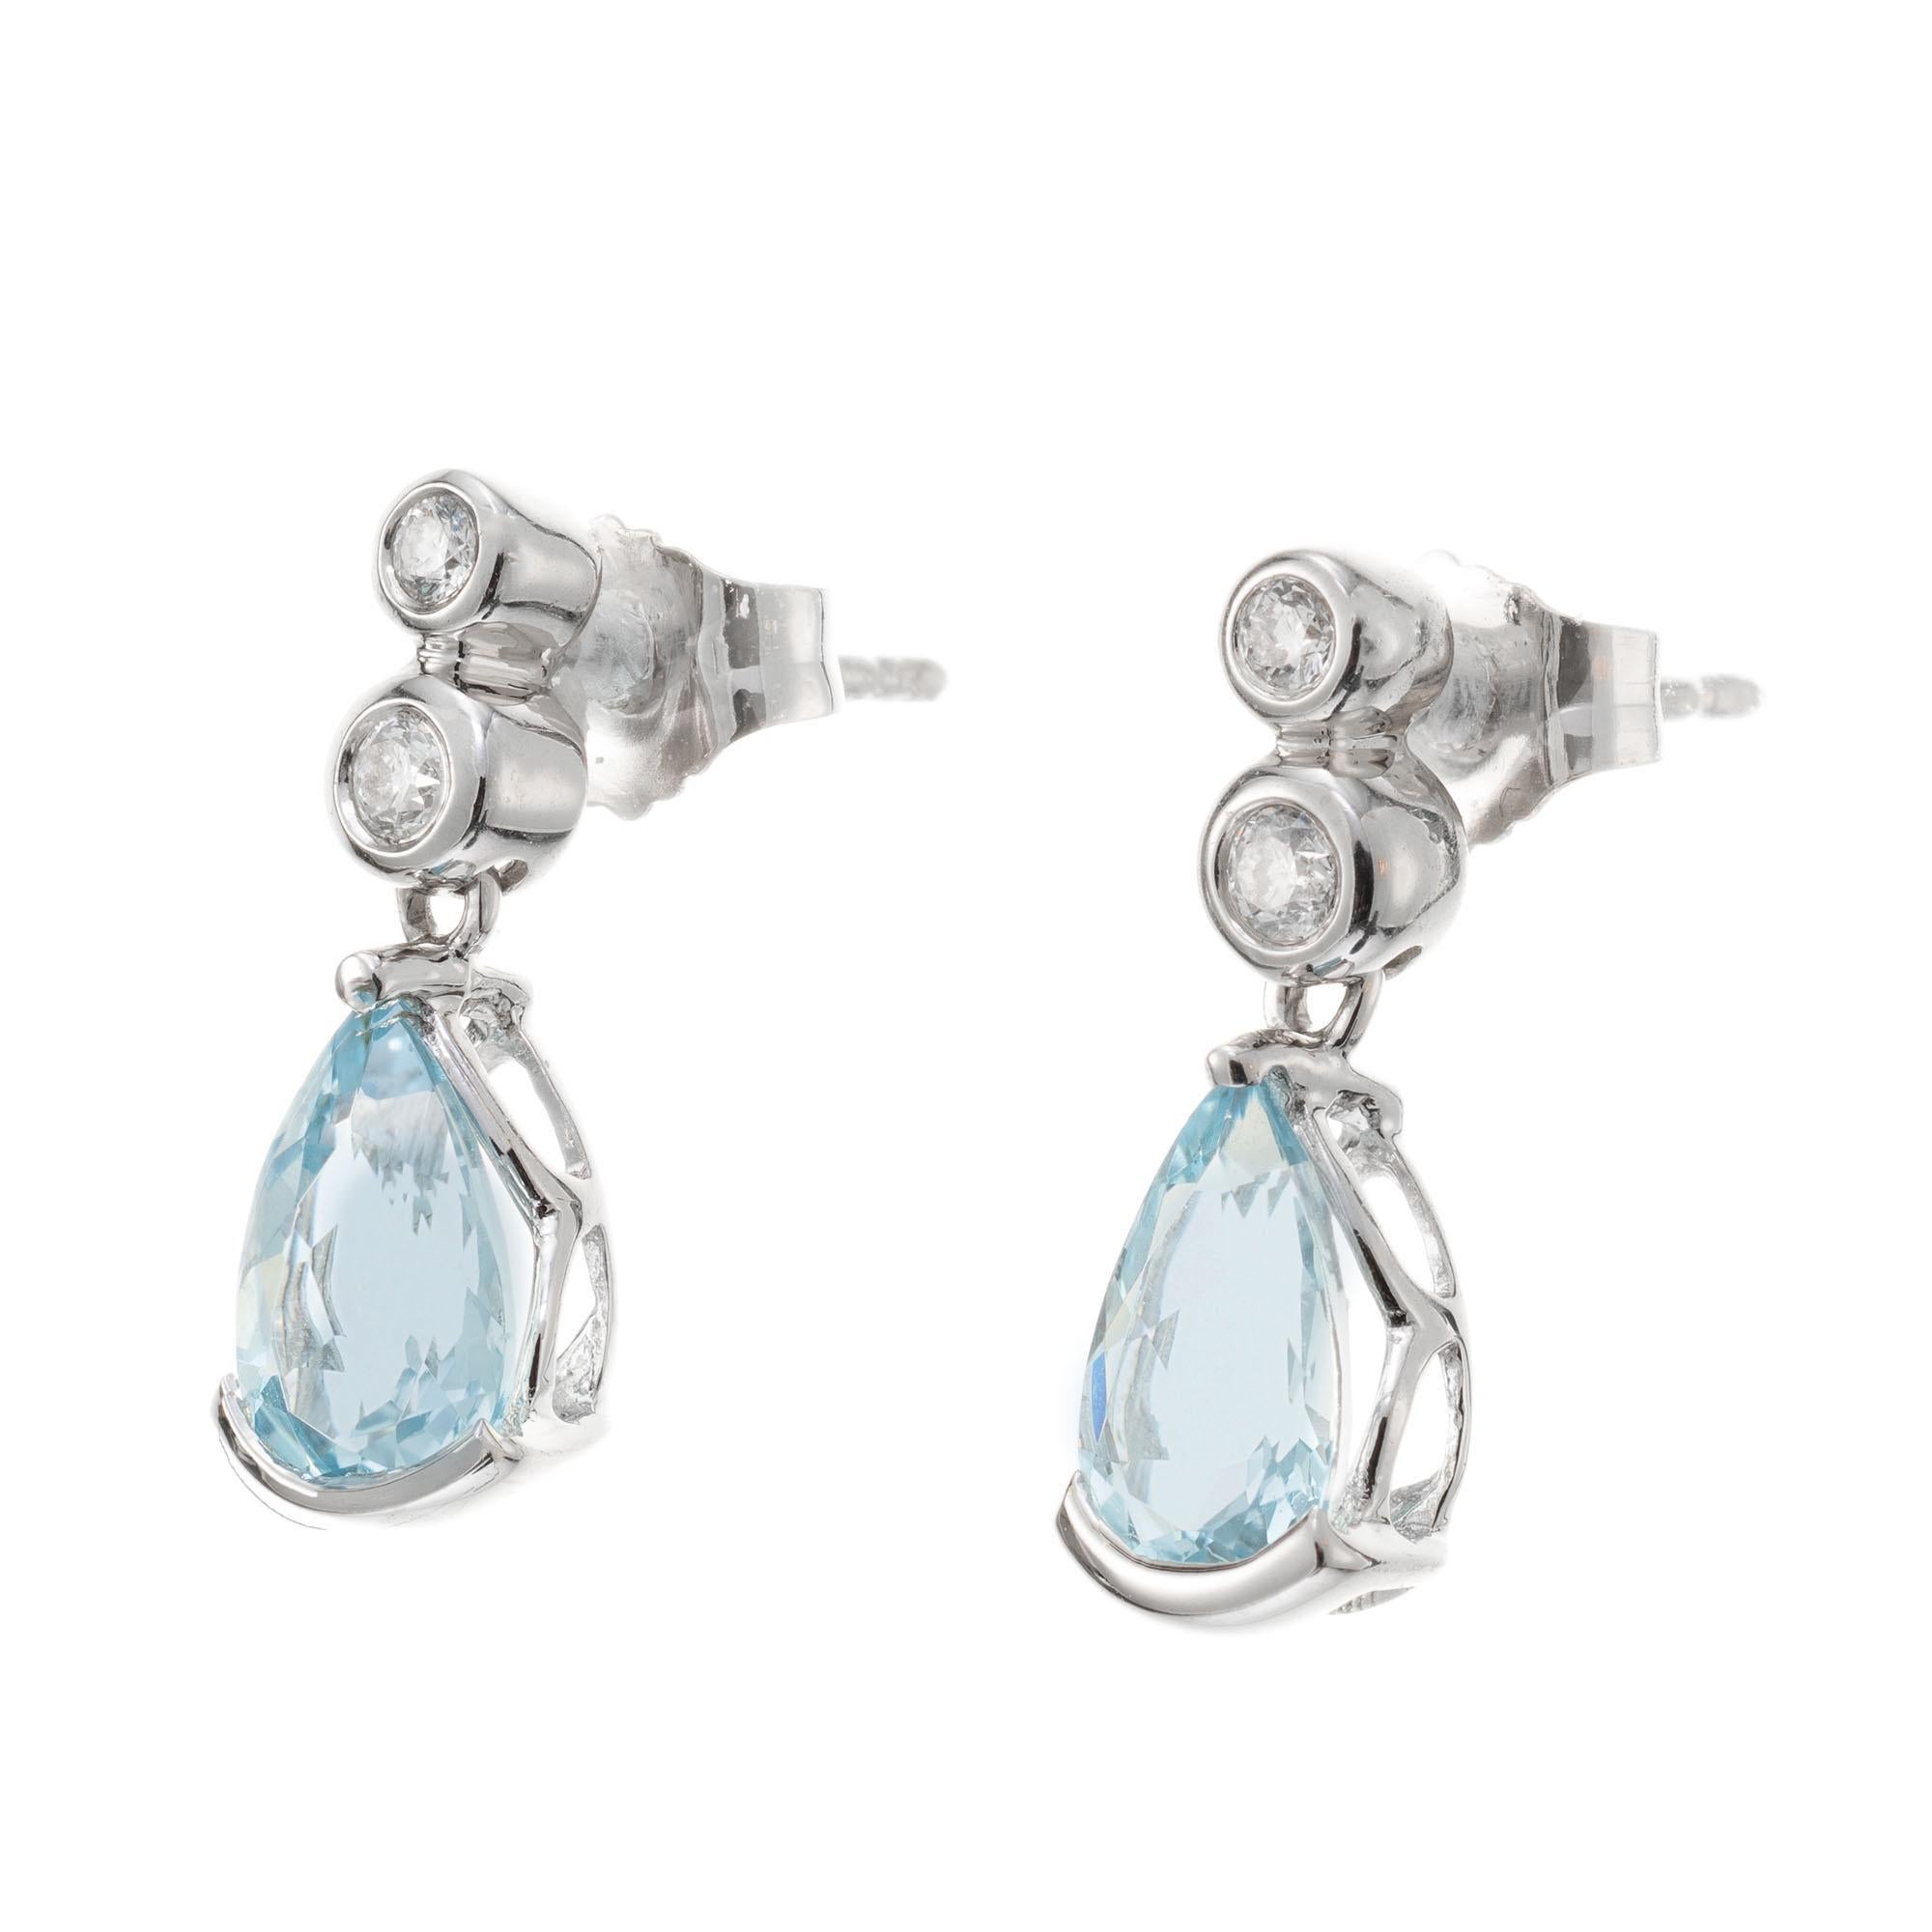 Pear-shaped aquamarine dangles with 4 round brilliant cut accent diamonds set in 14k white gold.  

2 pear shaped light greenish blue aquamarines, approx. 1.00ct
4 round brilliant cut diamonds, H-I VS2 approx. .18cts
14k white gold
Stamped: 14k
2.0